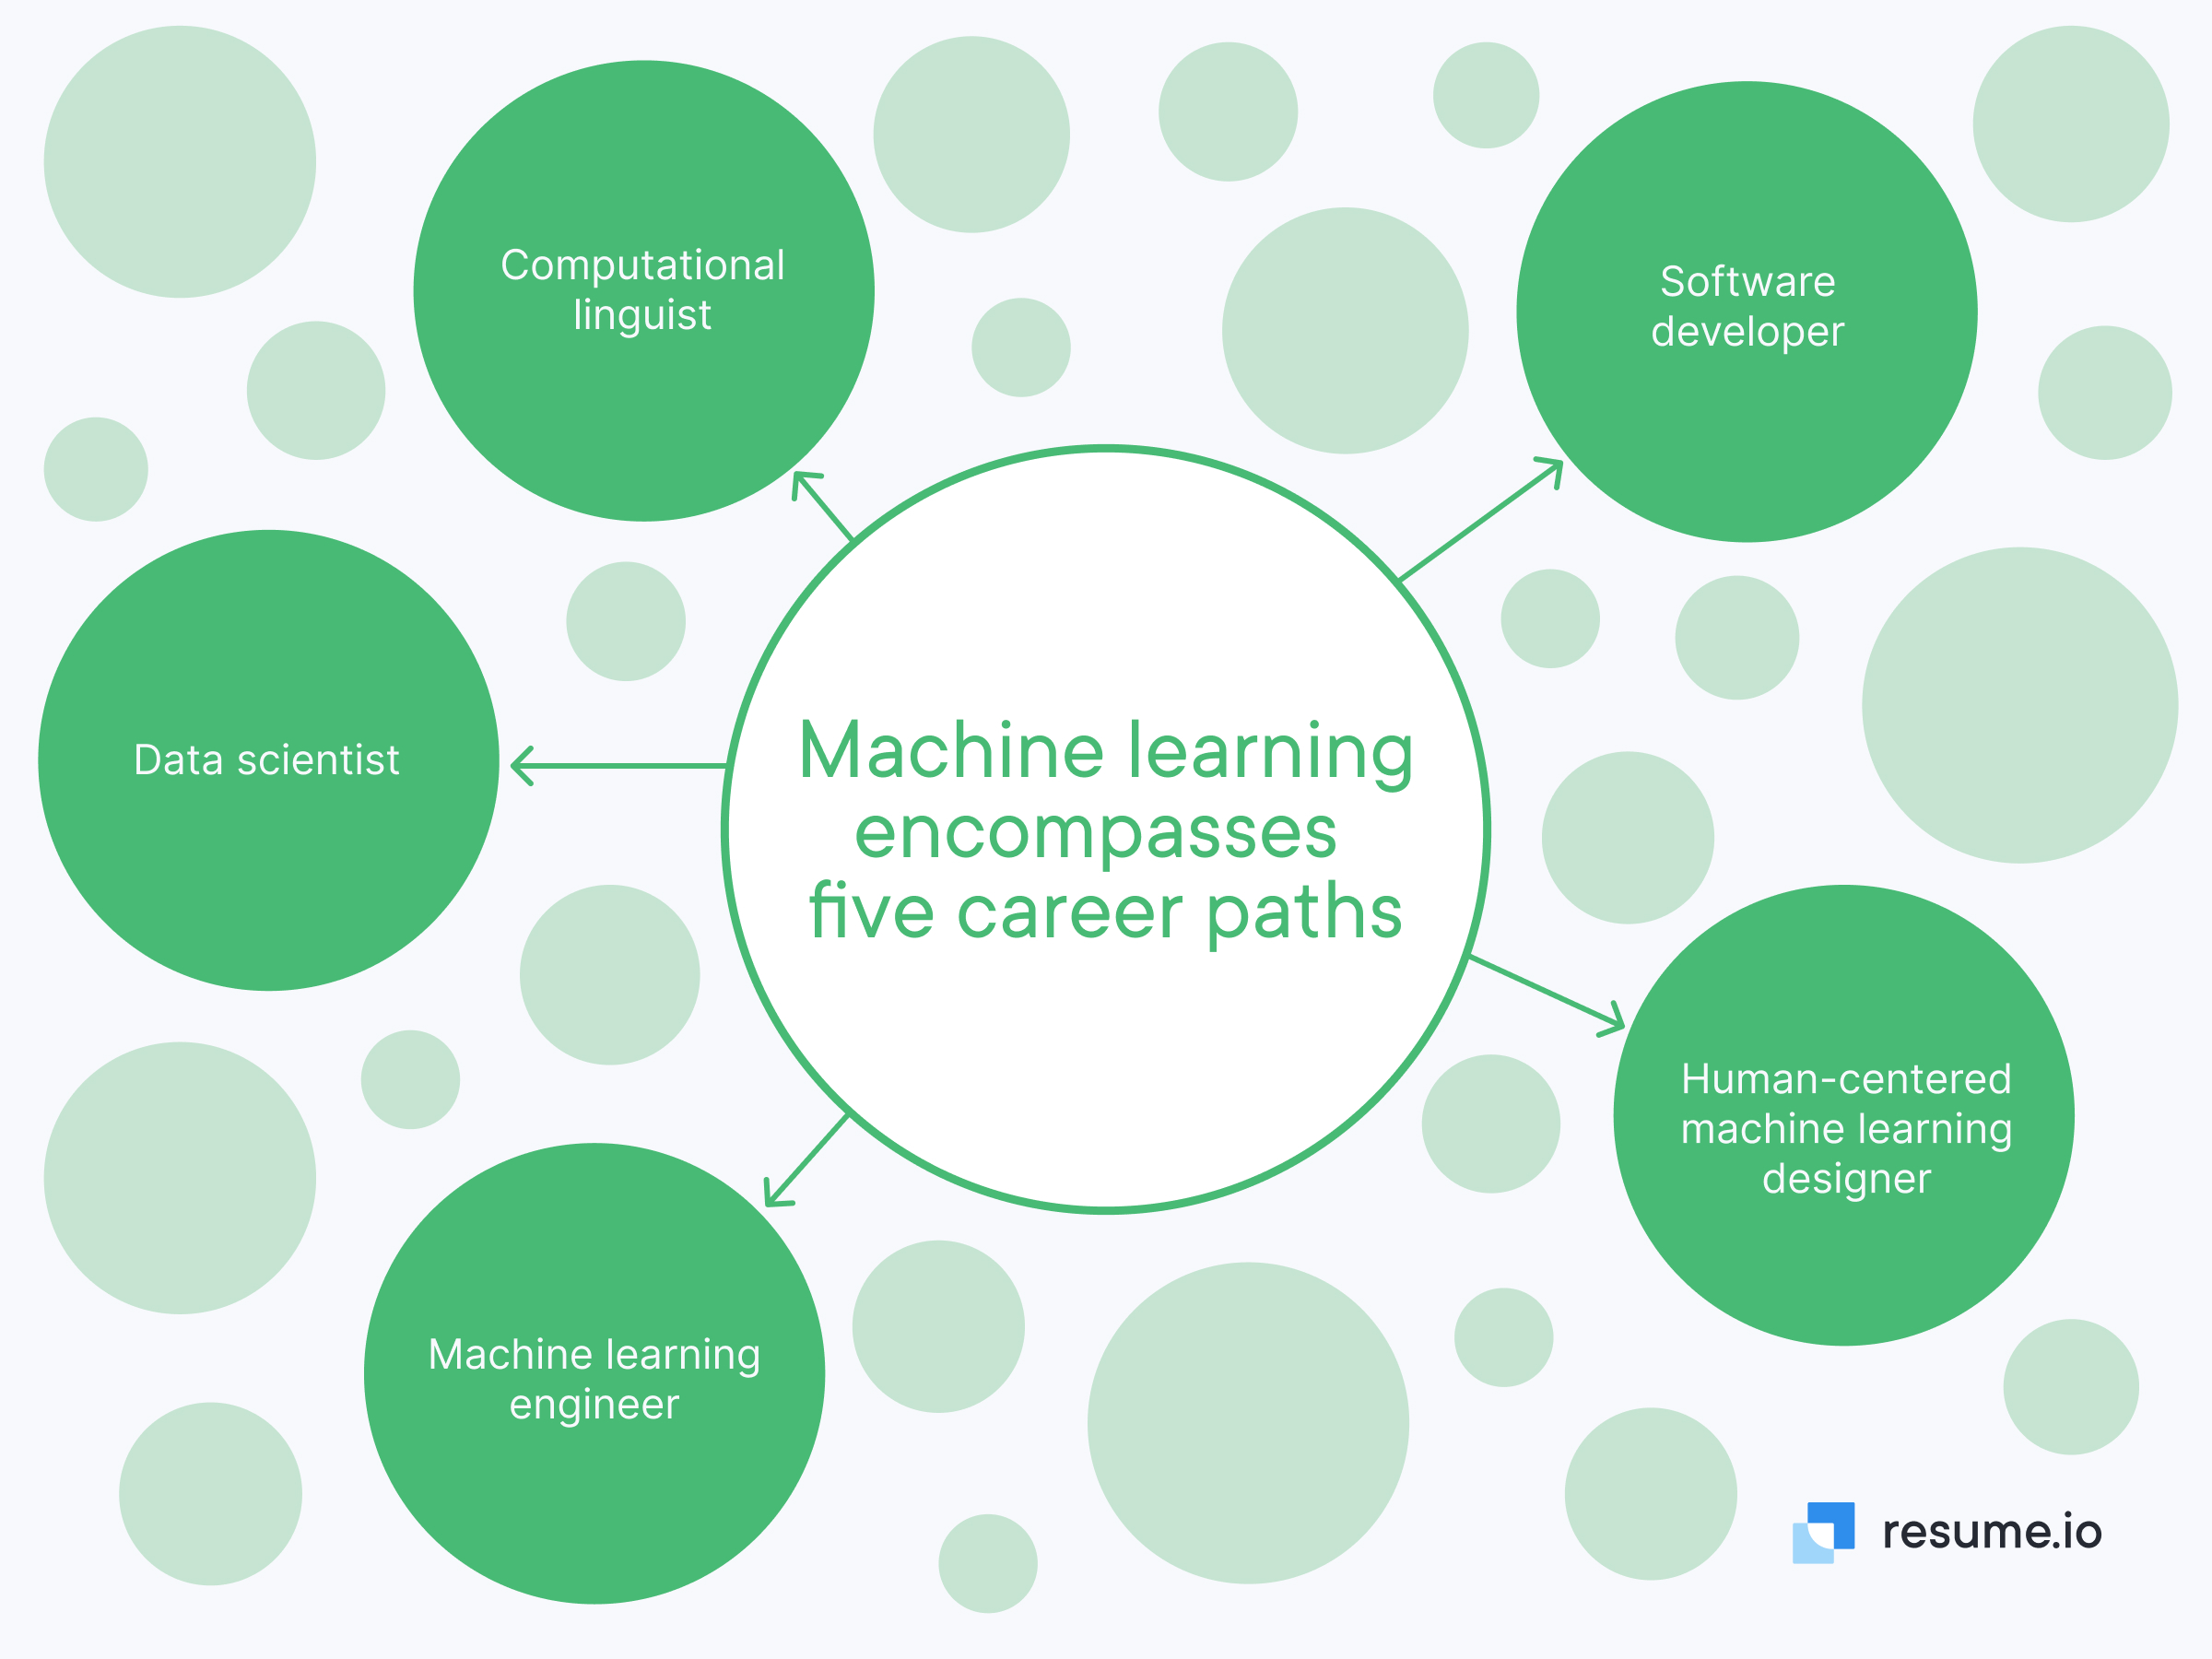 Machine learning encompasses five career paths